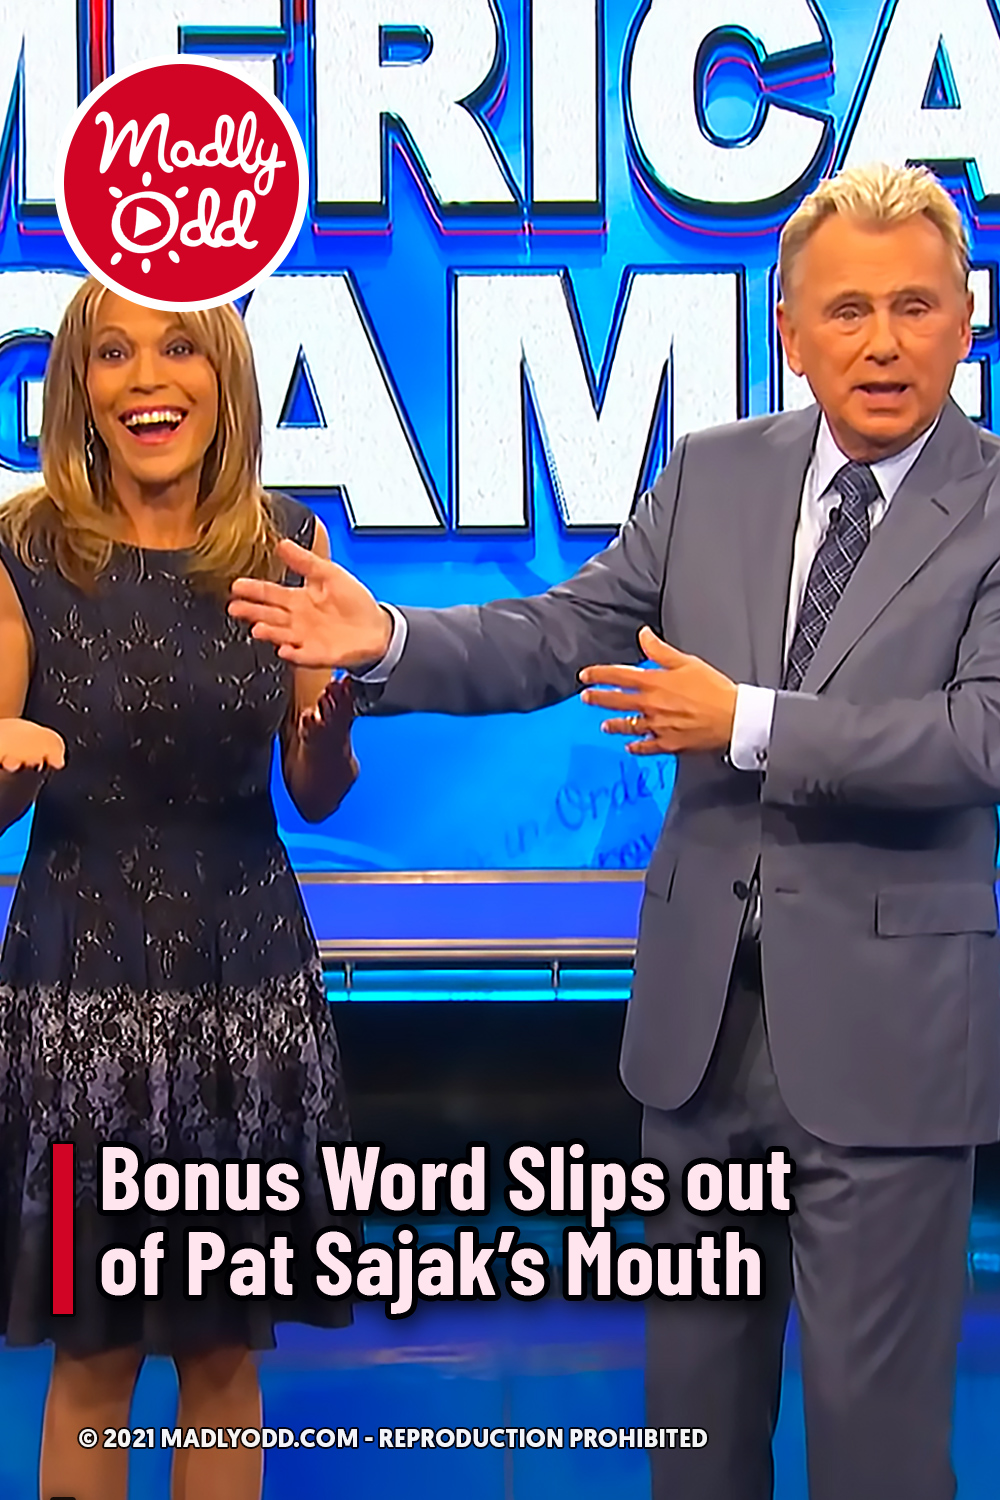 Bonus Word Slips out of Pat Sajak’s Mouth